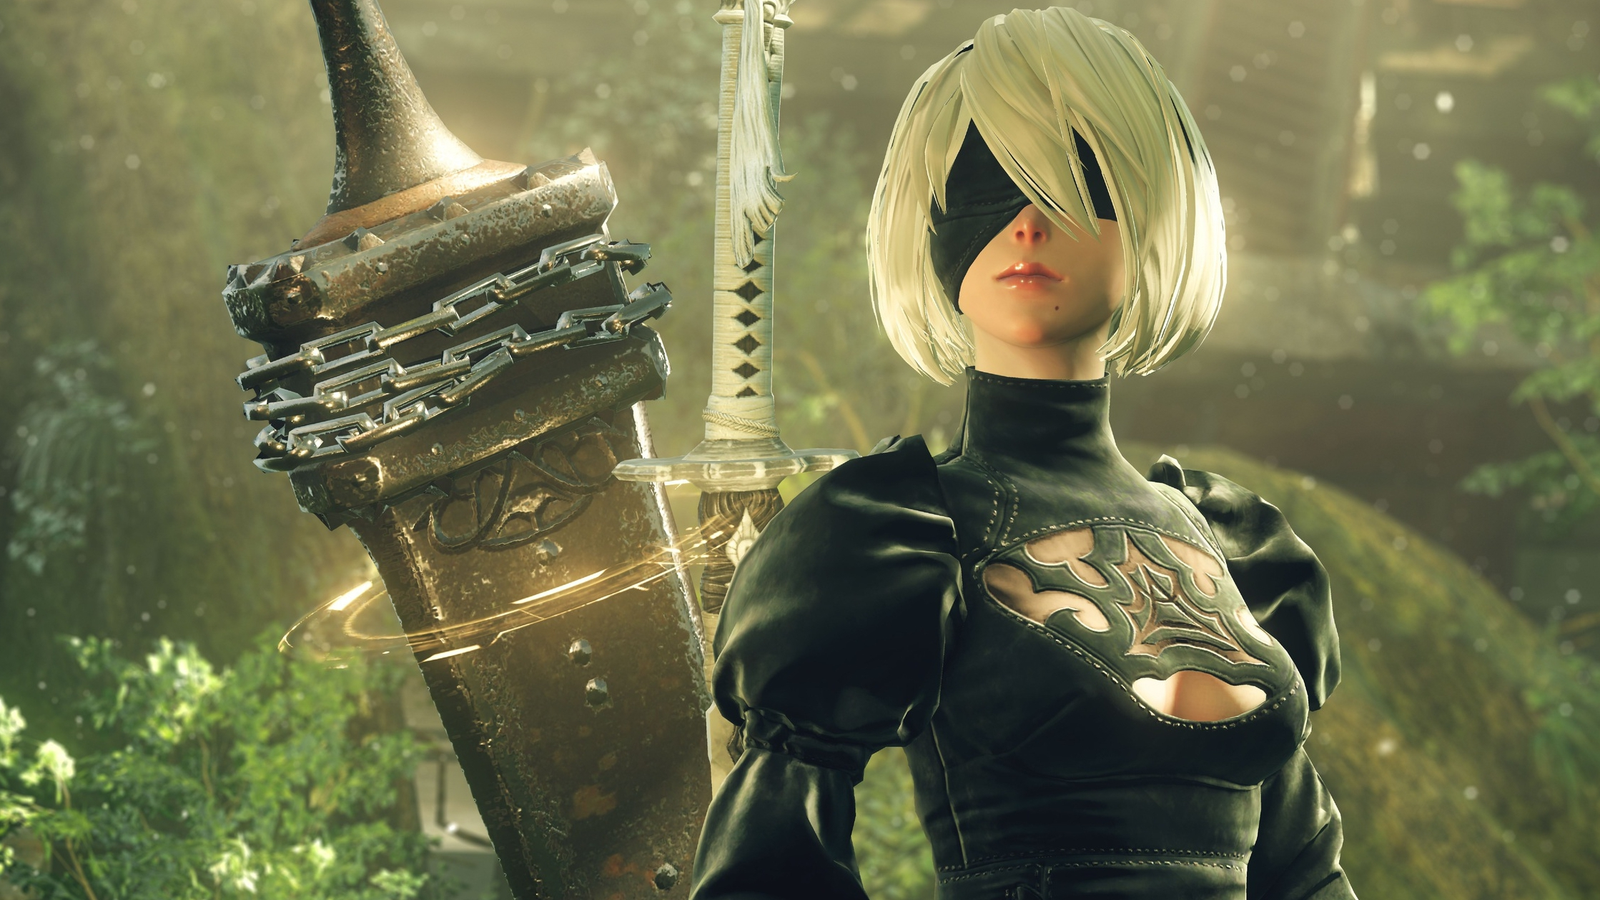 NieR:Automata Game of the YoRHa Edition at the best price